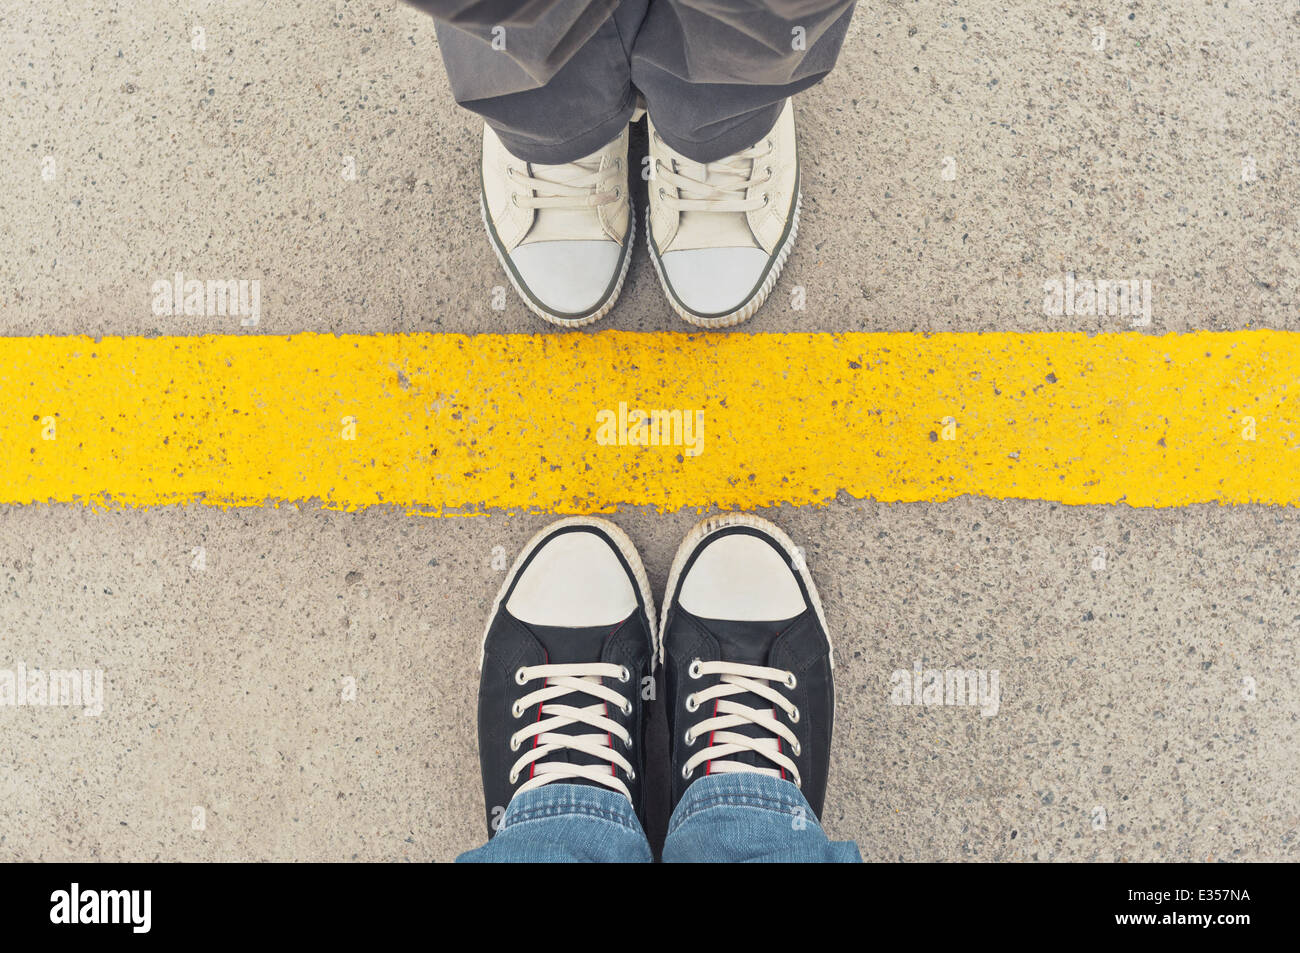 Sneakers from above. Male and female feet in sneakers from above, standing at dividing line. Stock Photo